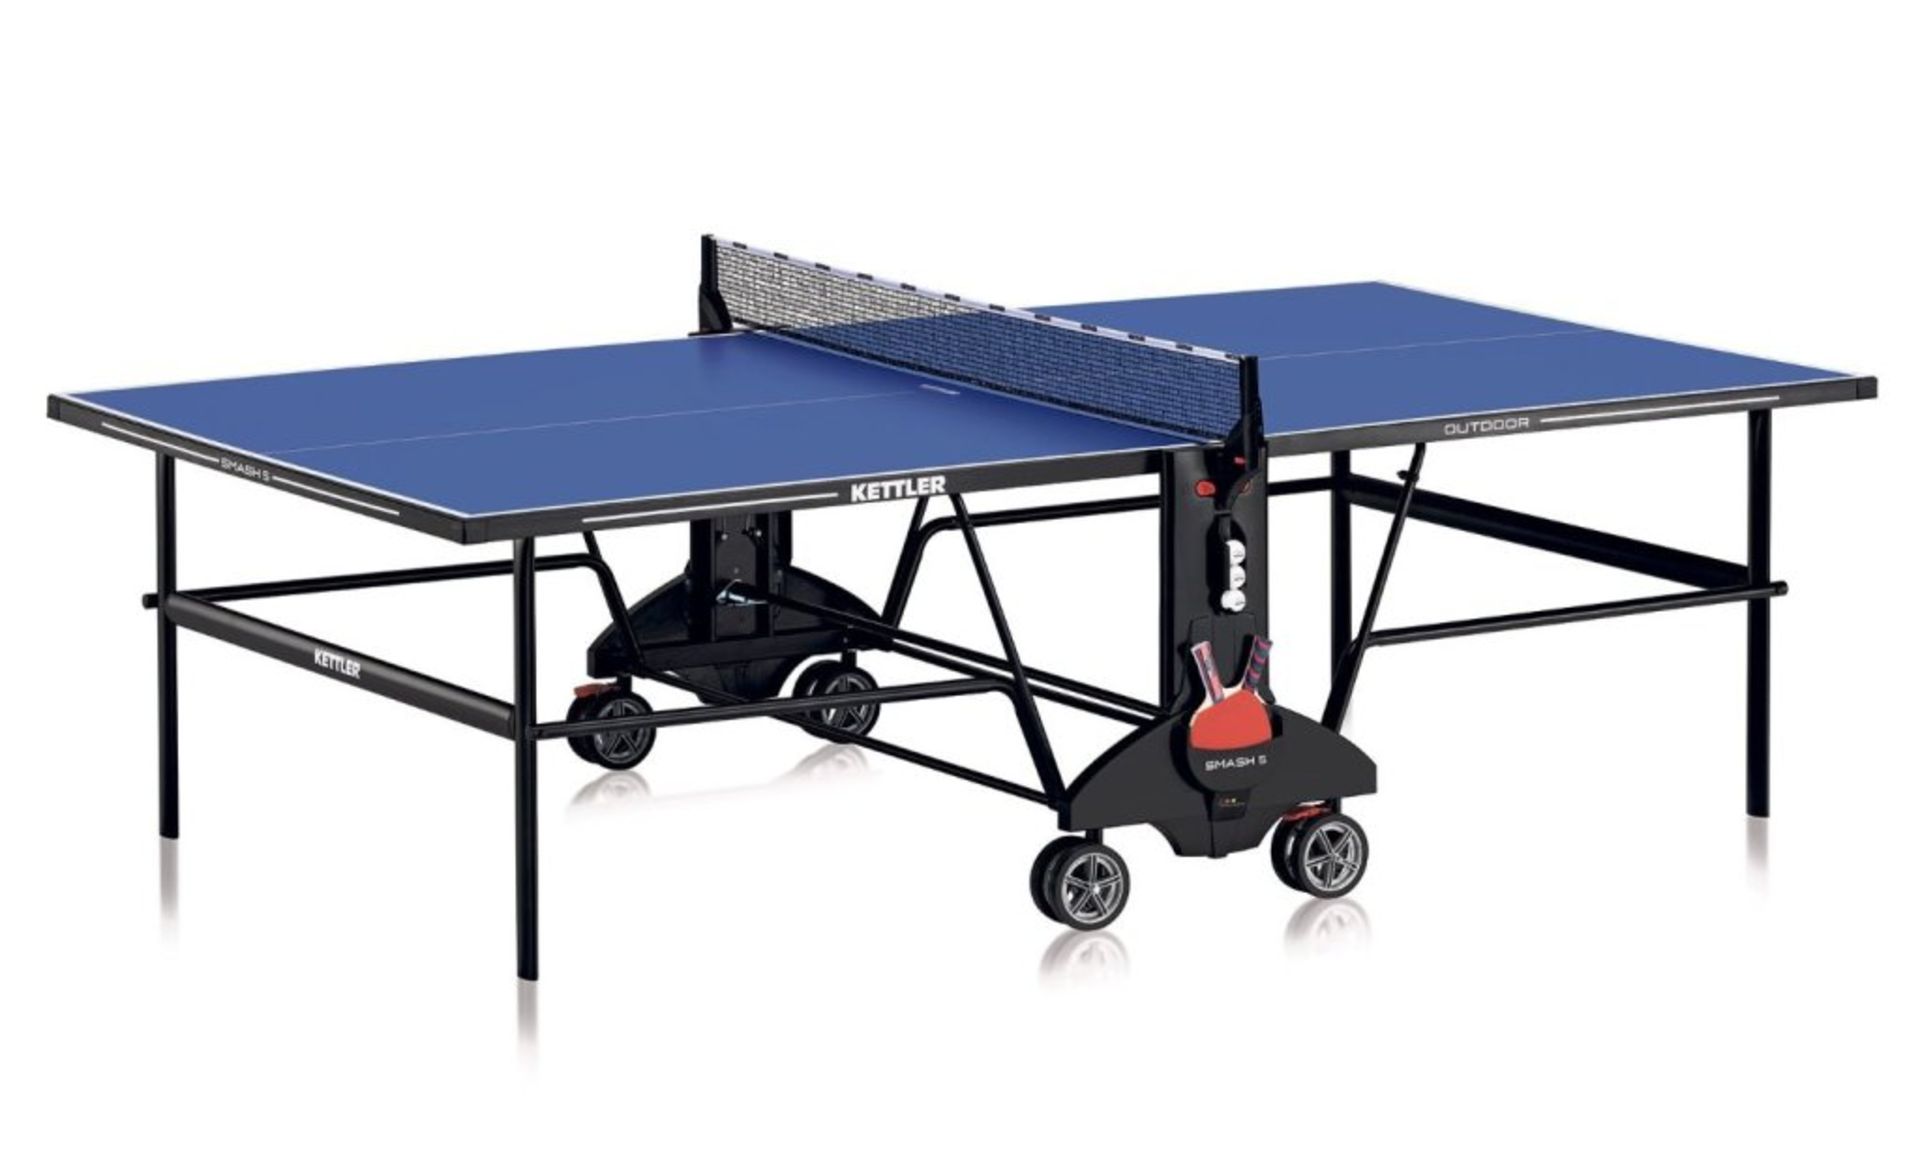 1 x BOXED KETTLER CLASSIC PRO OUTDOOR TABLE TENNIS TABLE RRP £400 (7047100)(17.4.15)`  *PLEASE